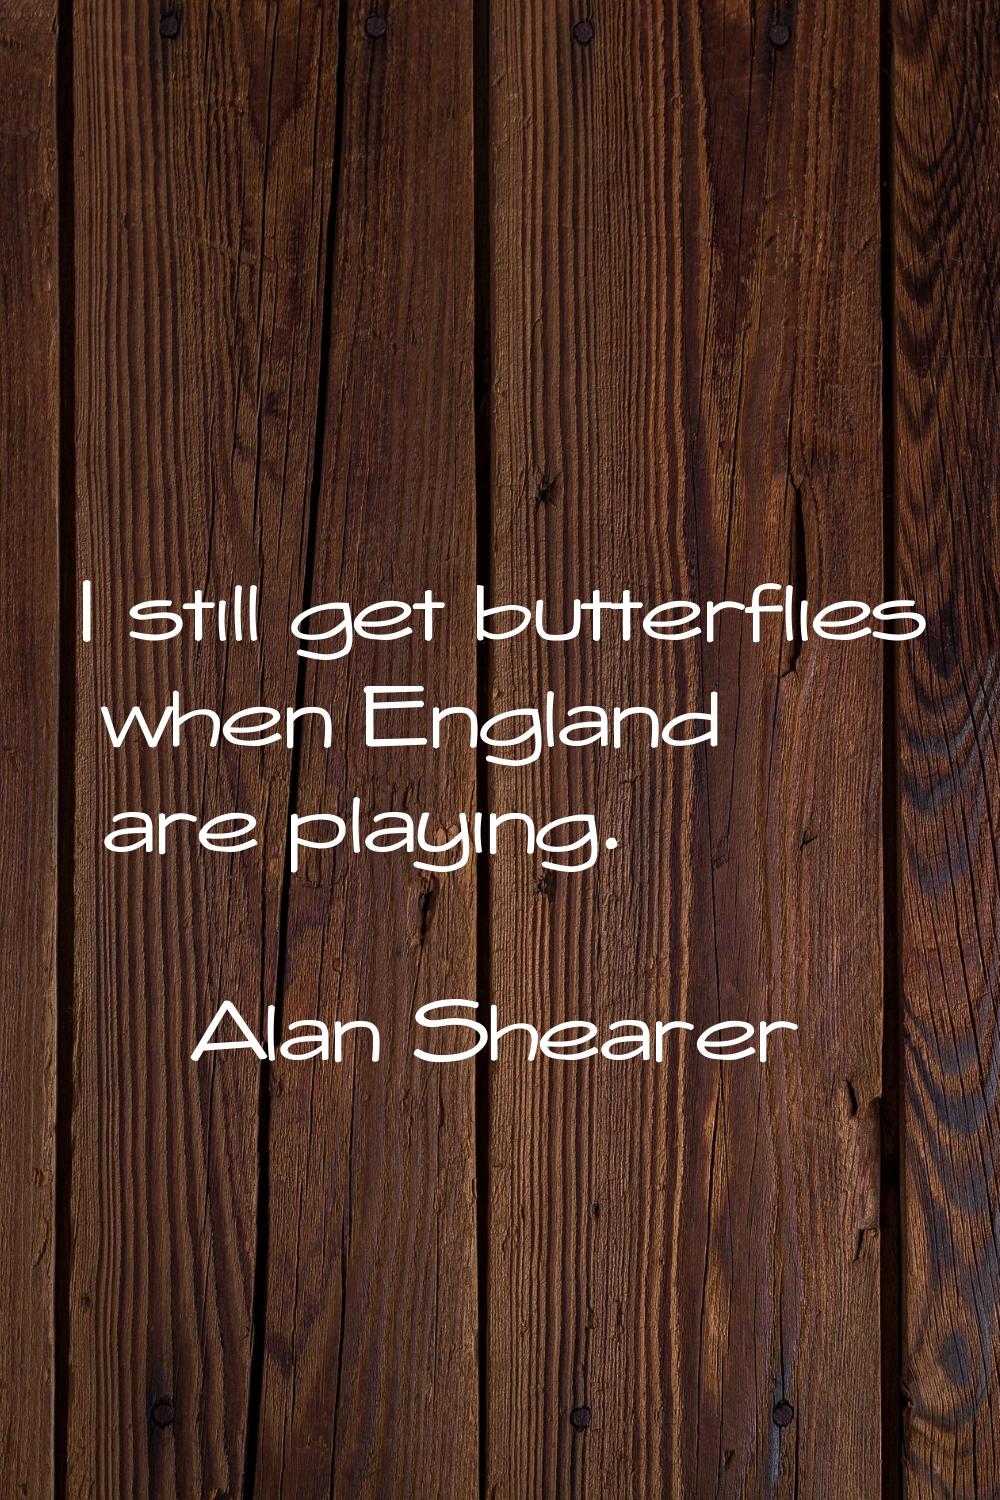 I still get butterflies when England are playing.